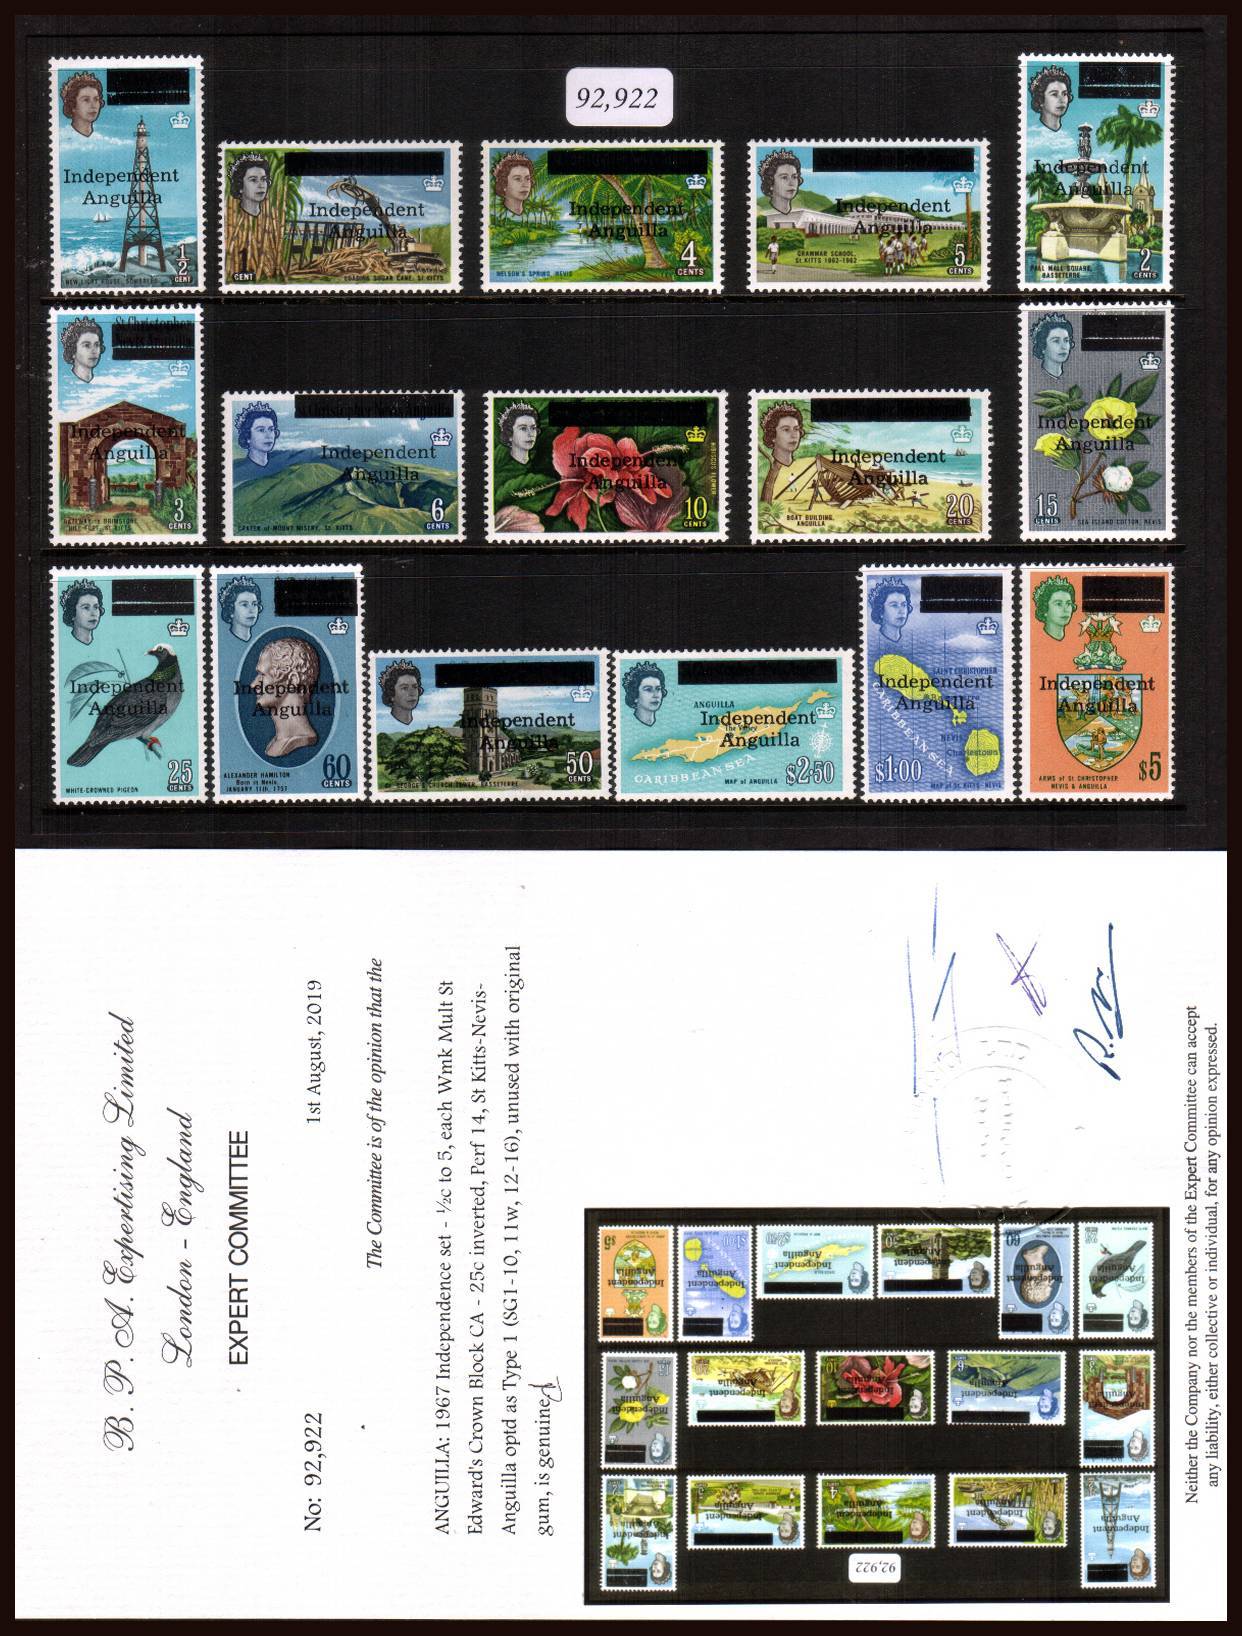 The Rarest set of QEII British Commonwealth Philately!<br/>
Unmounted mint set with a BPA certificate (2019) stating GENUINE! Complete sets in the world unmounted, maybe 40? Terms are available. SG Cat 25,000 
<b><p style=